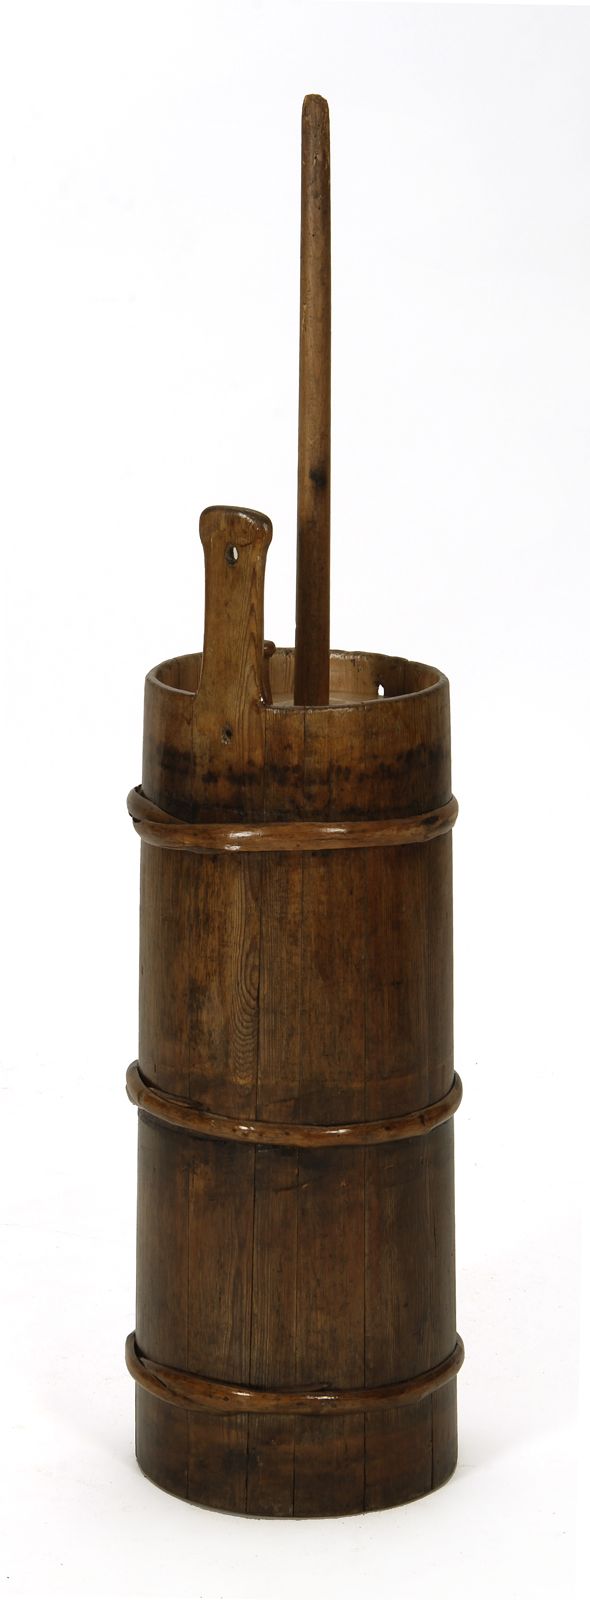 ANTIQUE AMERICAN BUTTER CHURN18th